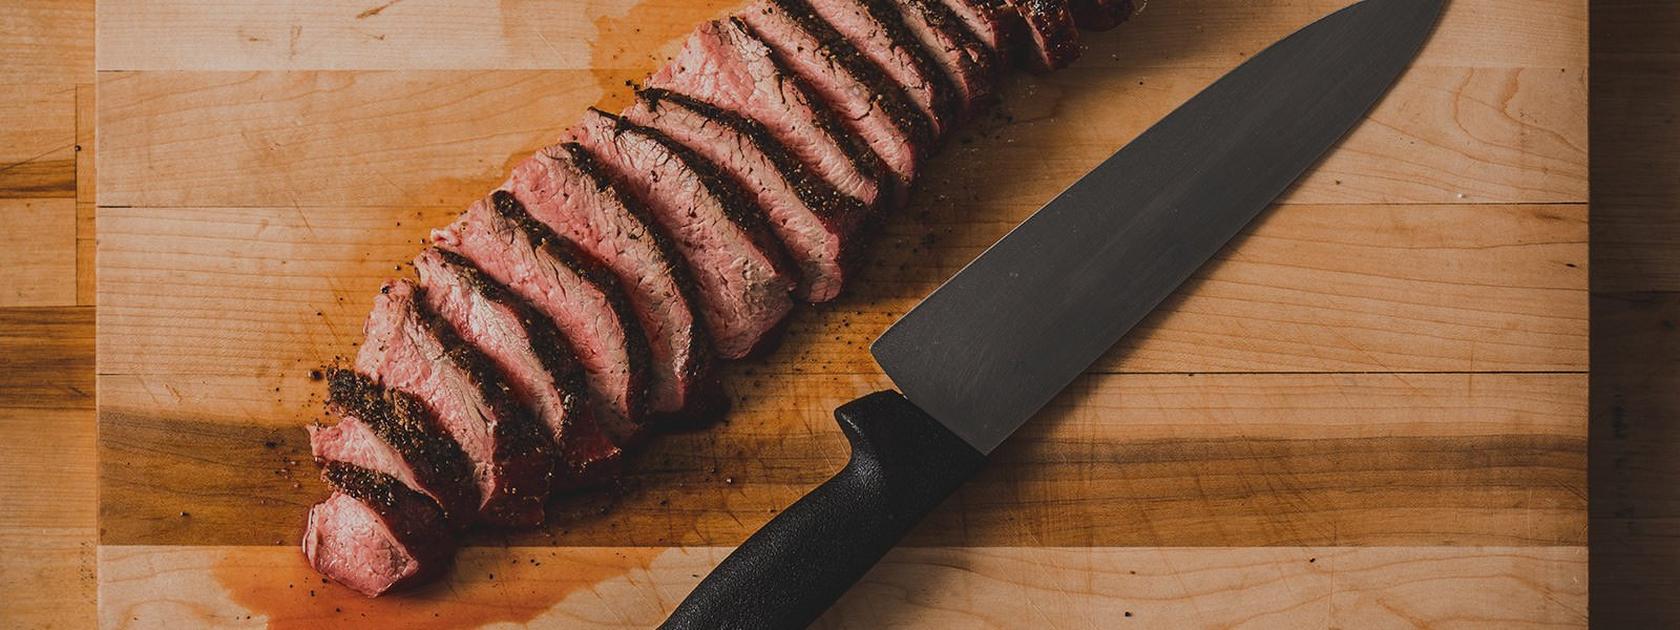 HOW TO CARVE A TRI TIP